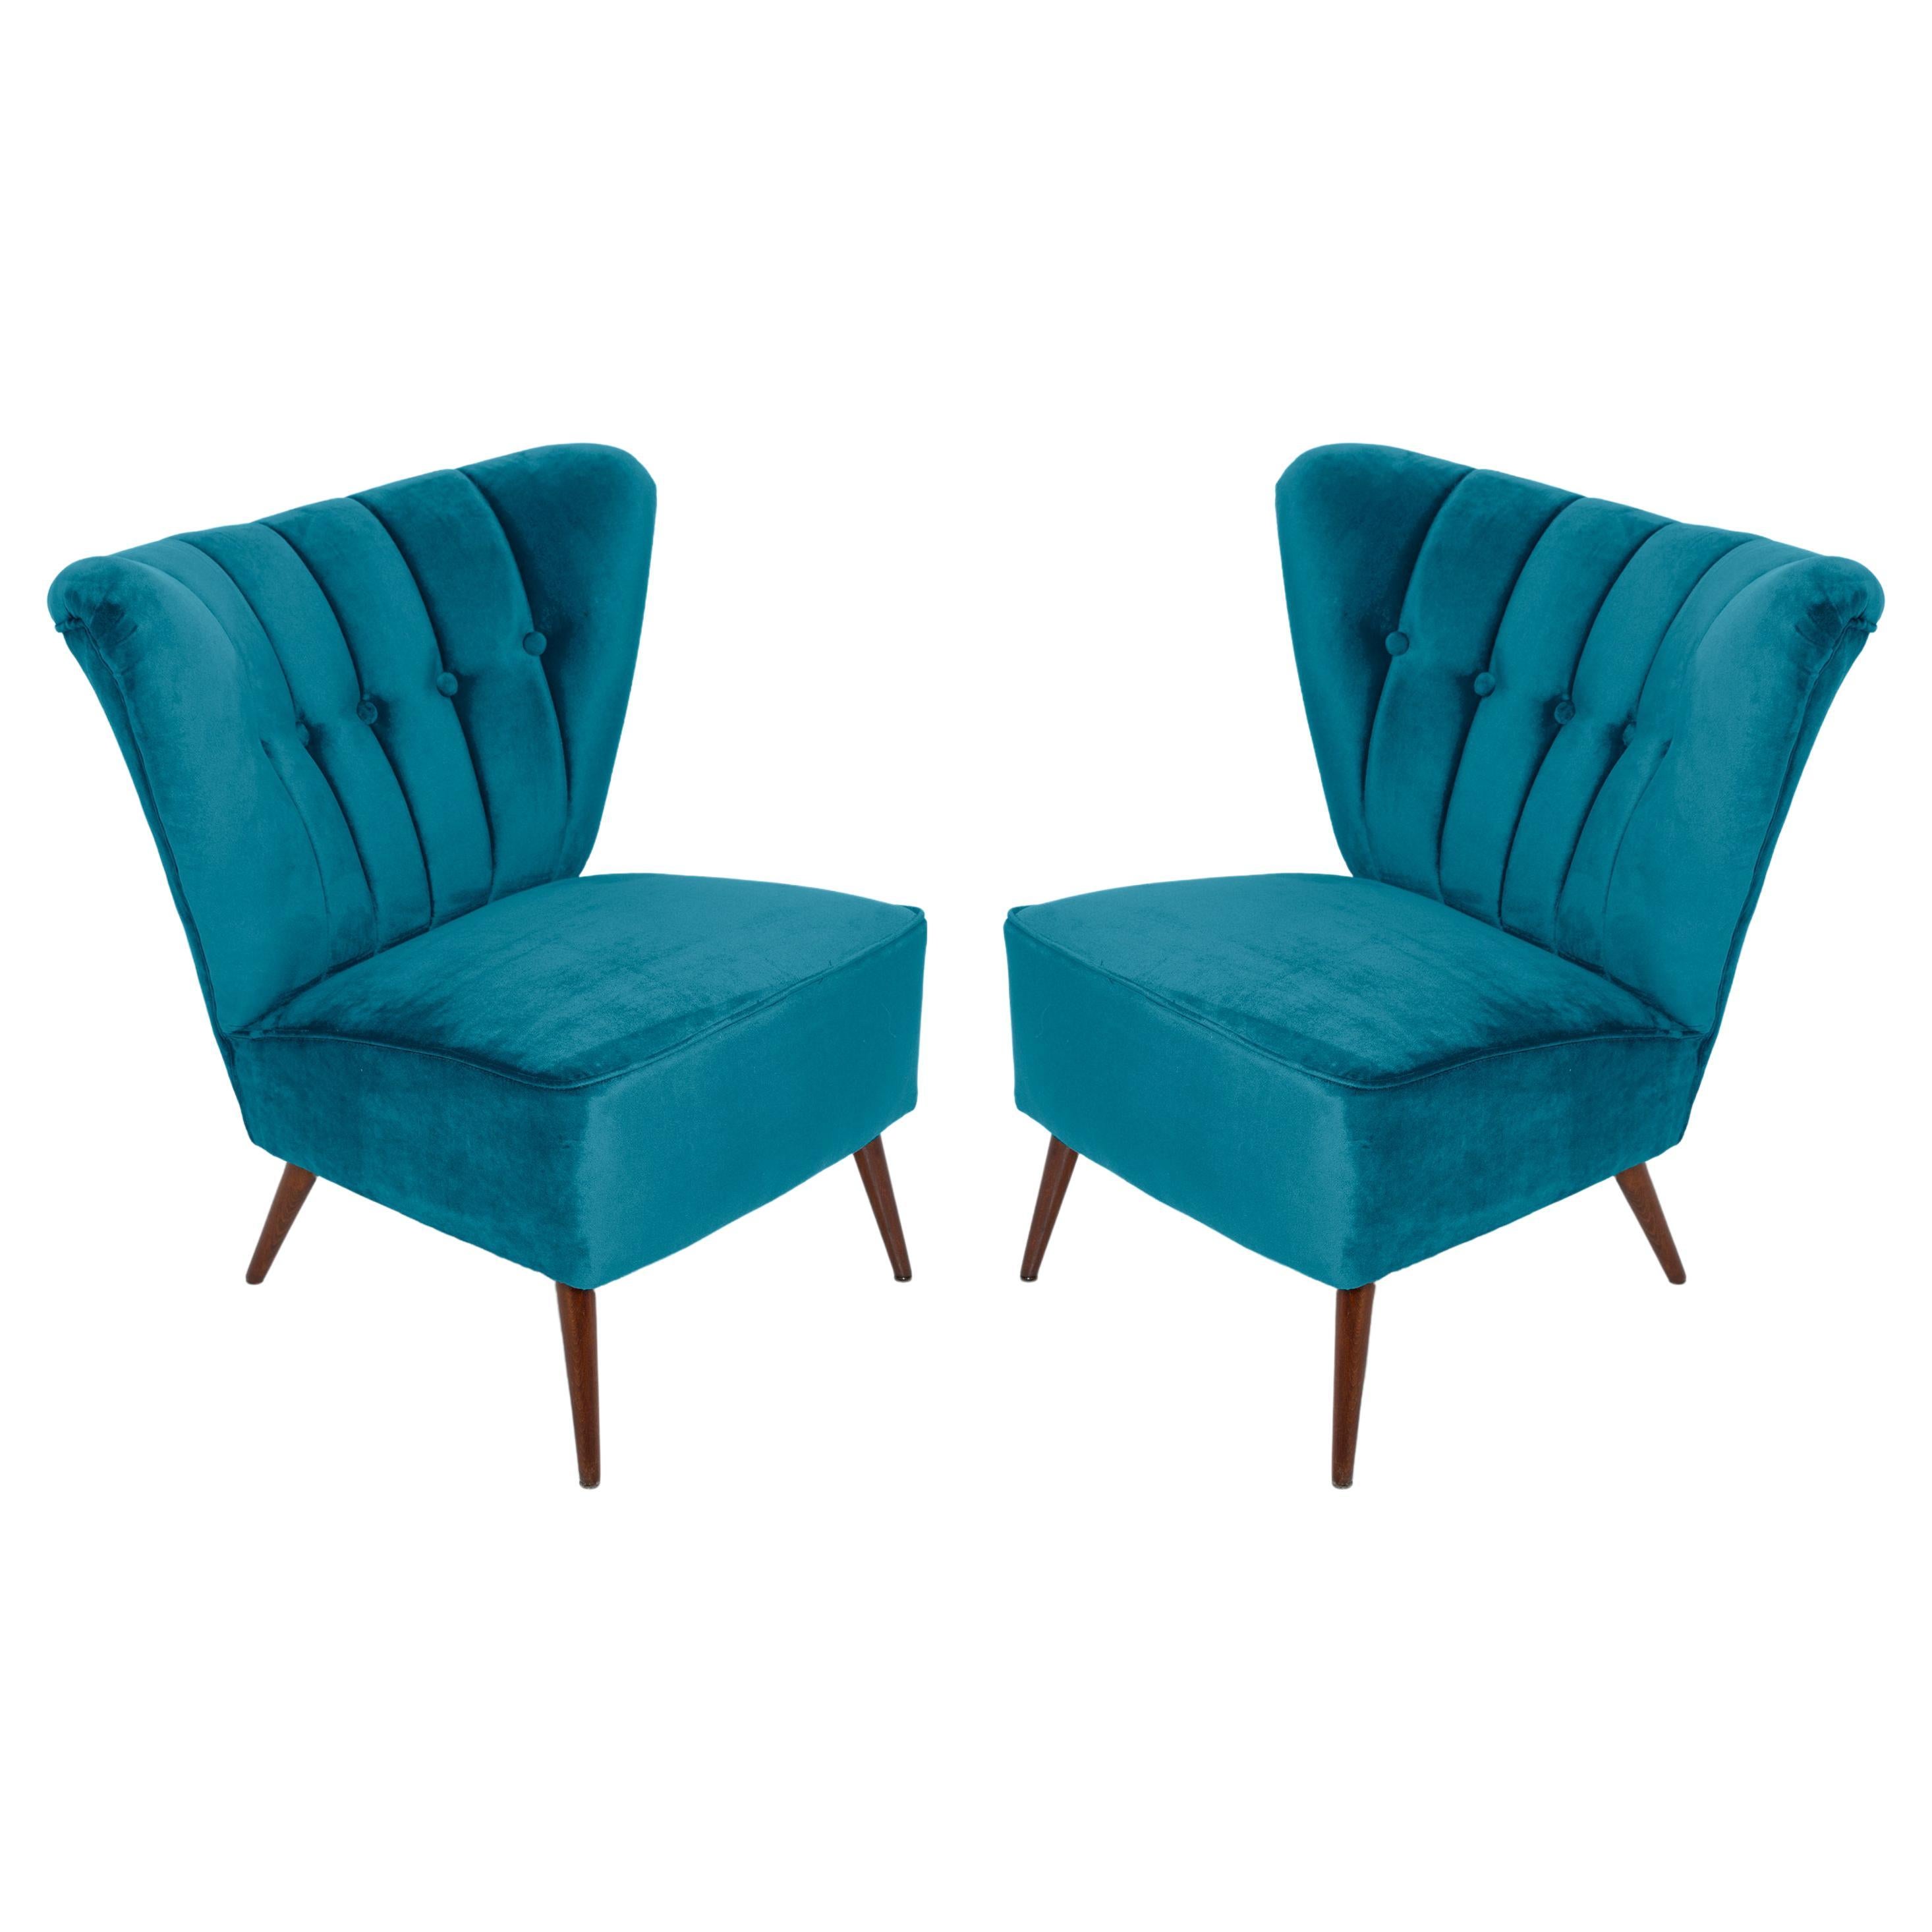 Set of Two Midcentury Petrol Blue Velvet Club Armchairs, Europe, 1960s For Sale